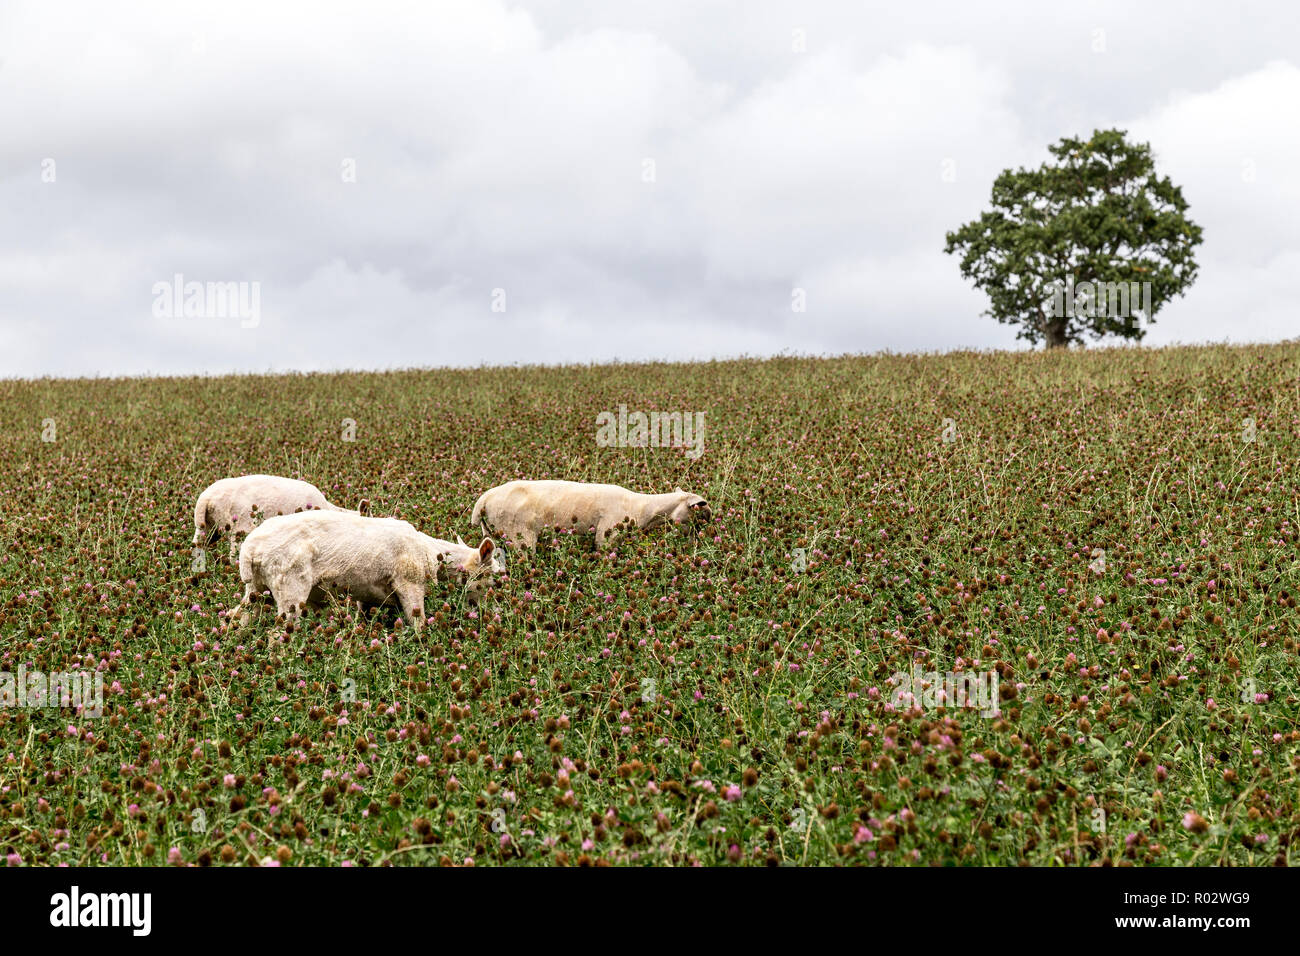 red clover,sheep in red clover, fodder and rotational crop.A herbaceous plant of the pea family, ruminant mammal with a thick woolly coat,Ovis aries, Stock Photo